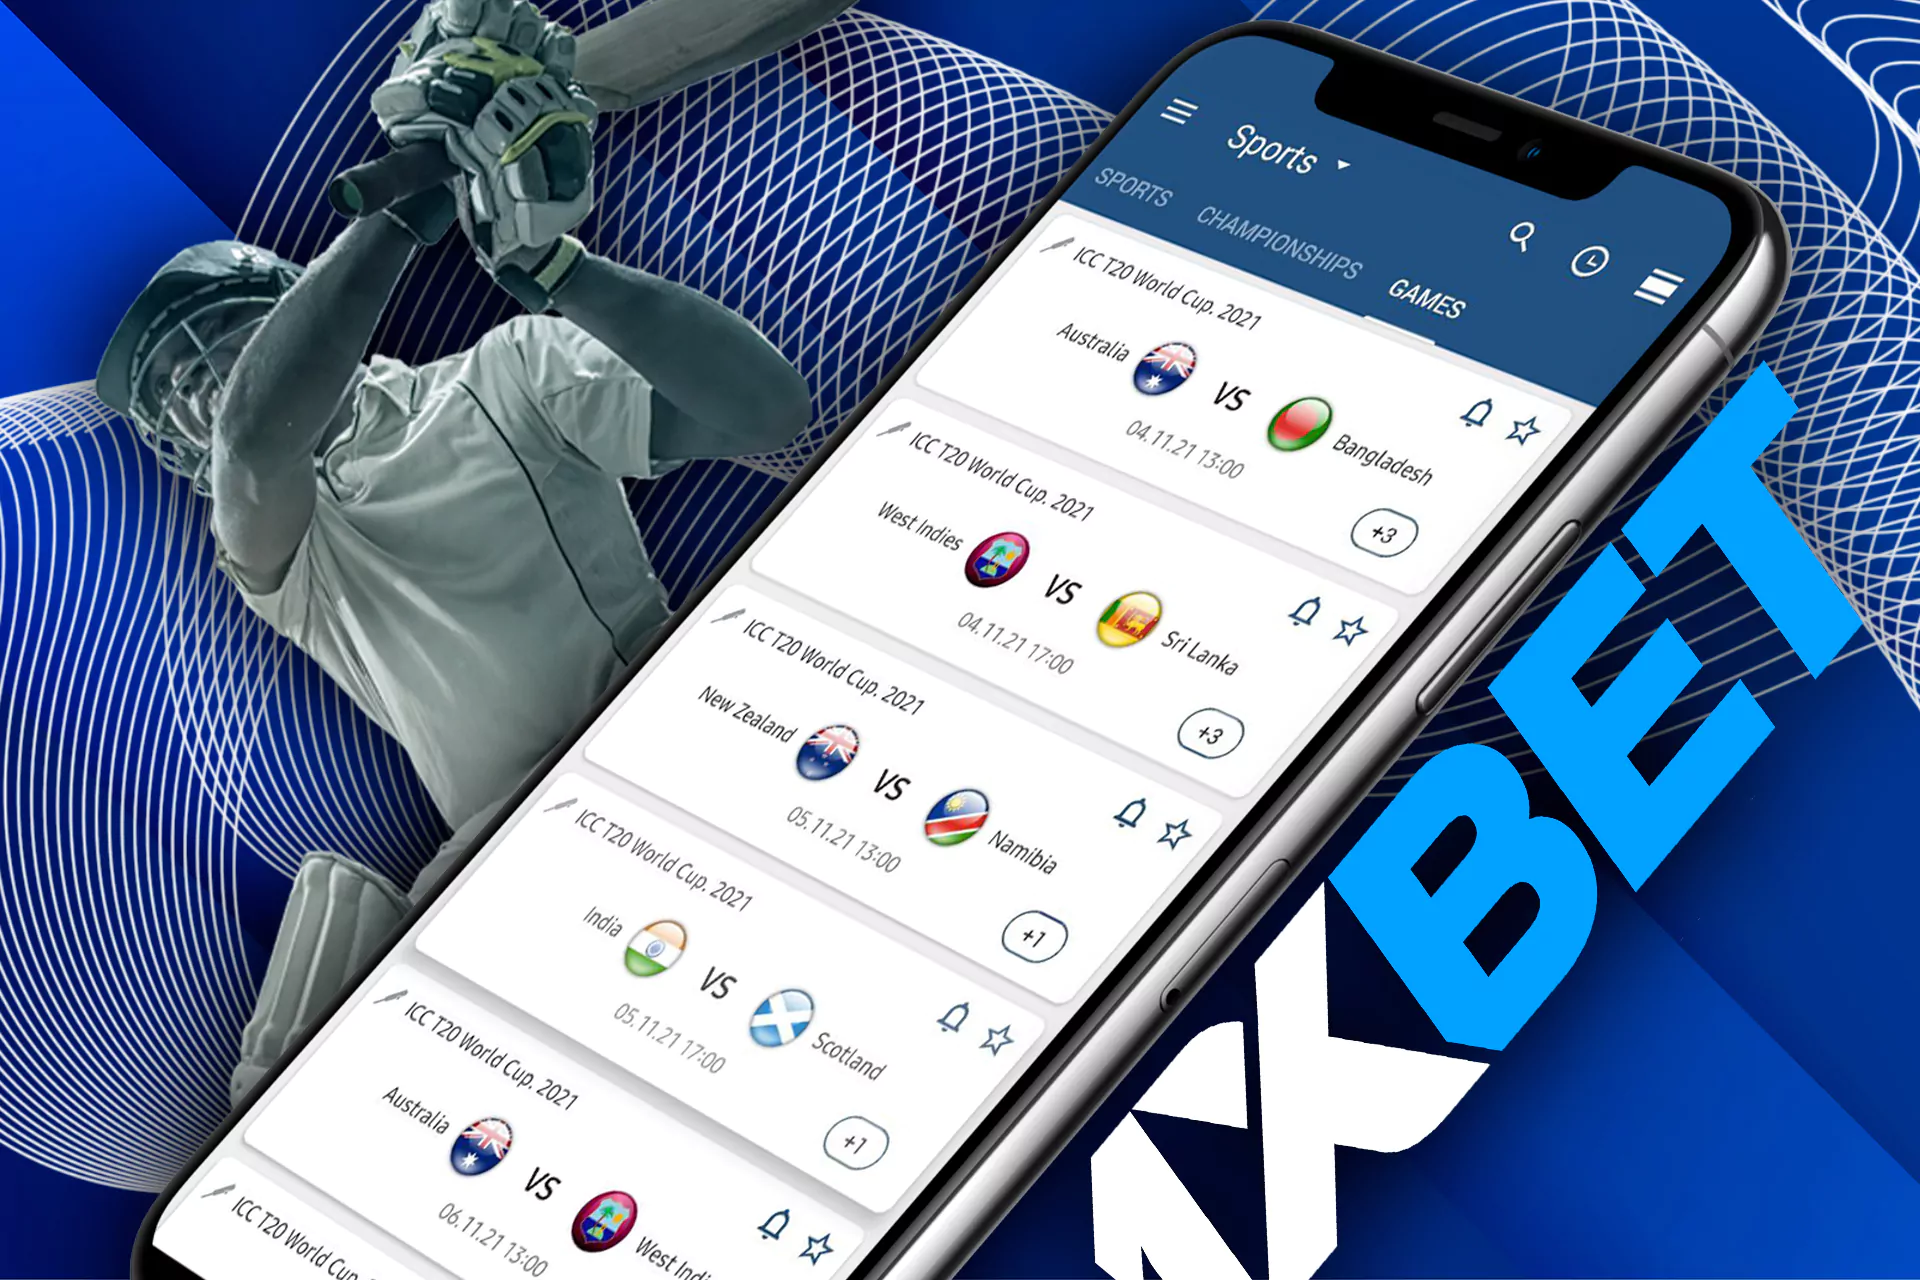 You can easliy bet on cricket via the 1xbet app.